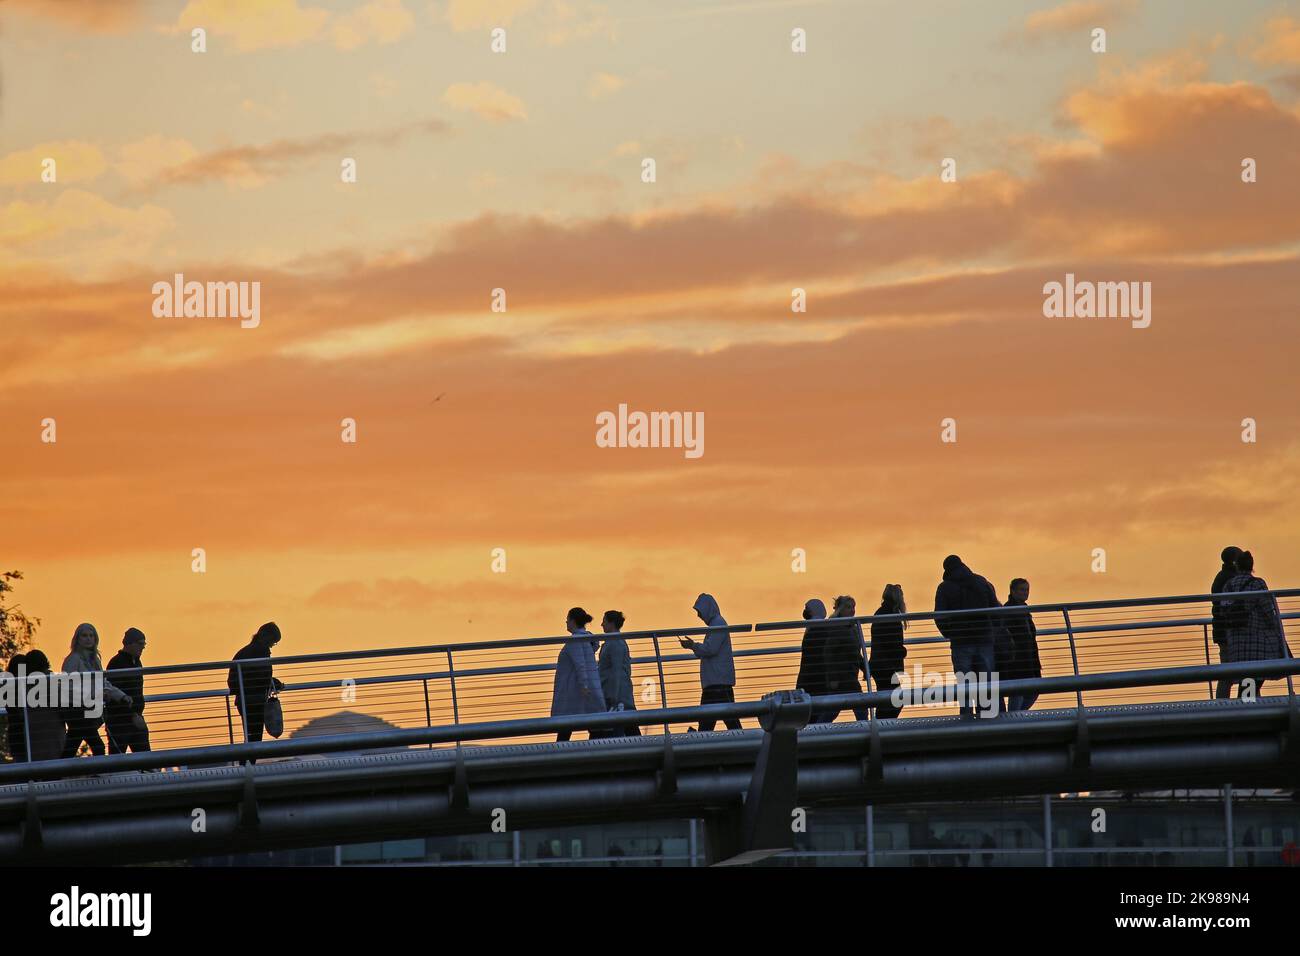 Millennium bridge or the wobbly bridge at sunset with tourists and walkers Stock Photo